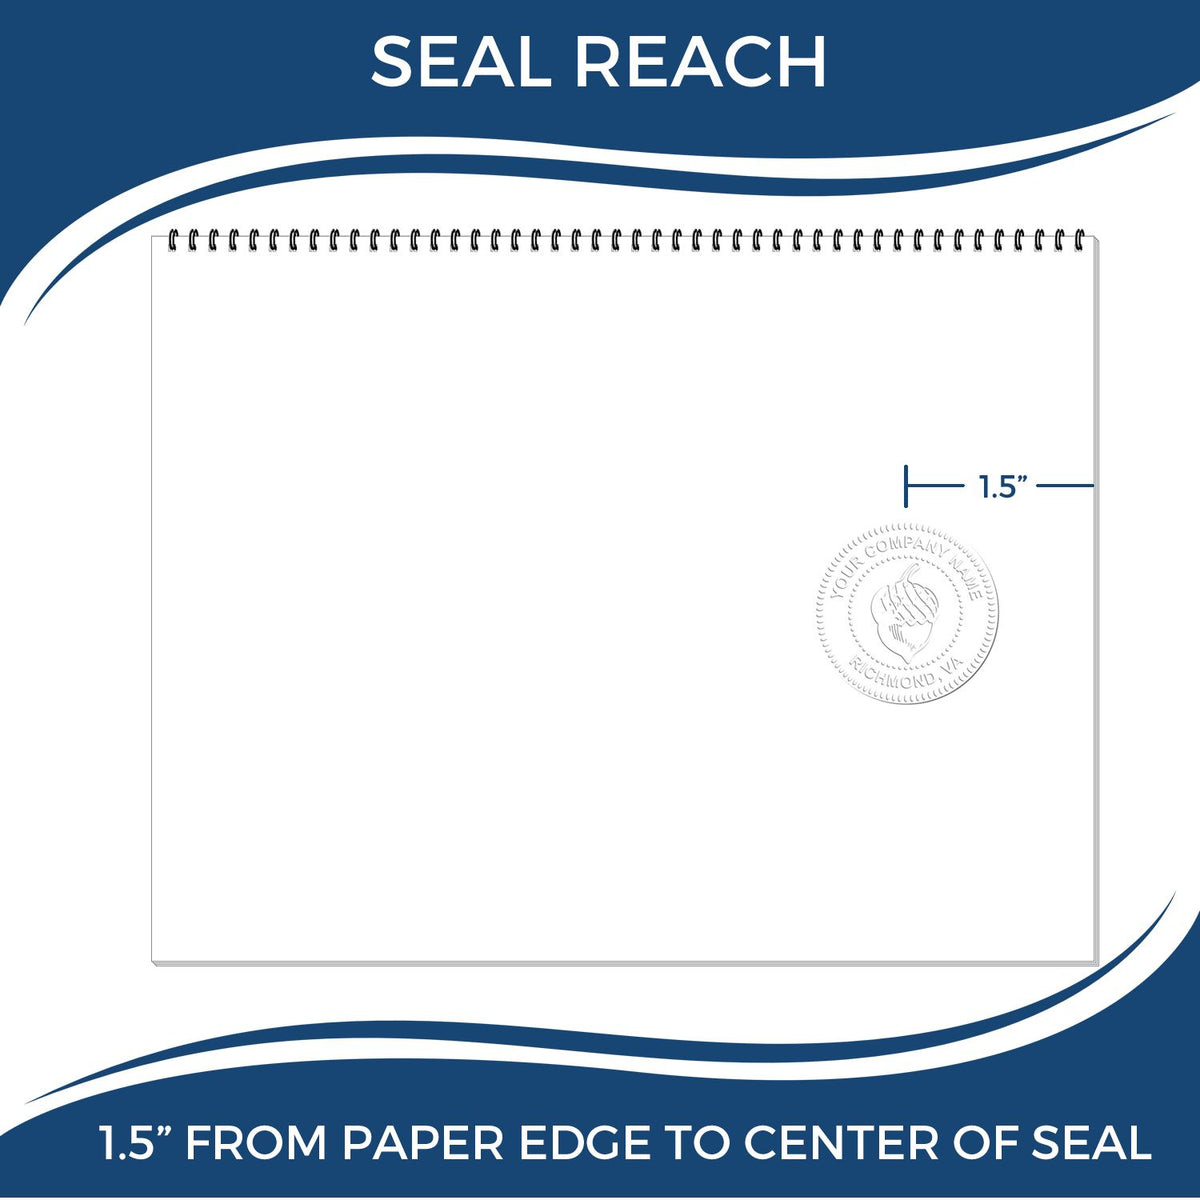 An infographic showing the seal reach which is represented by a ruler and a miniature seal image of the Soft Texas Professional Engineer Seal